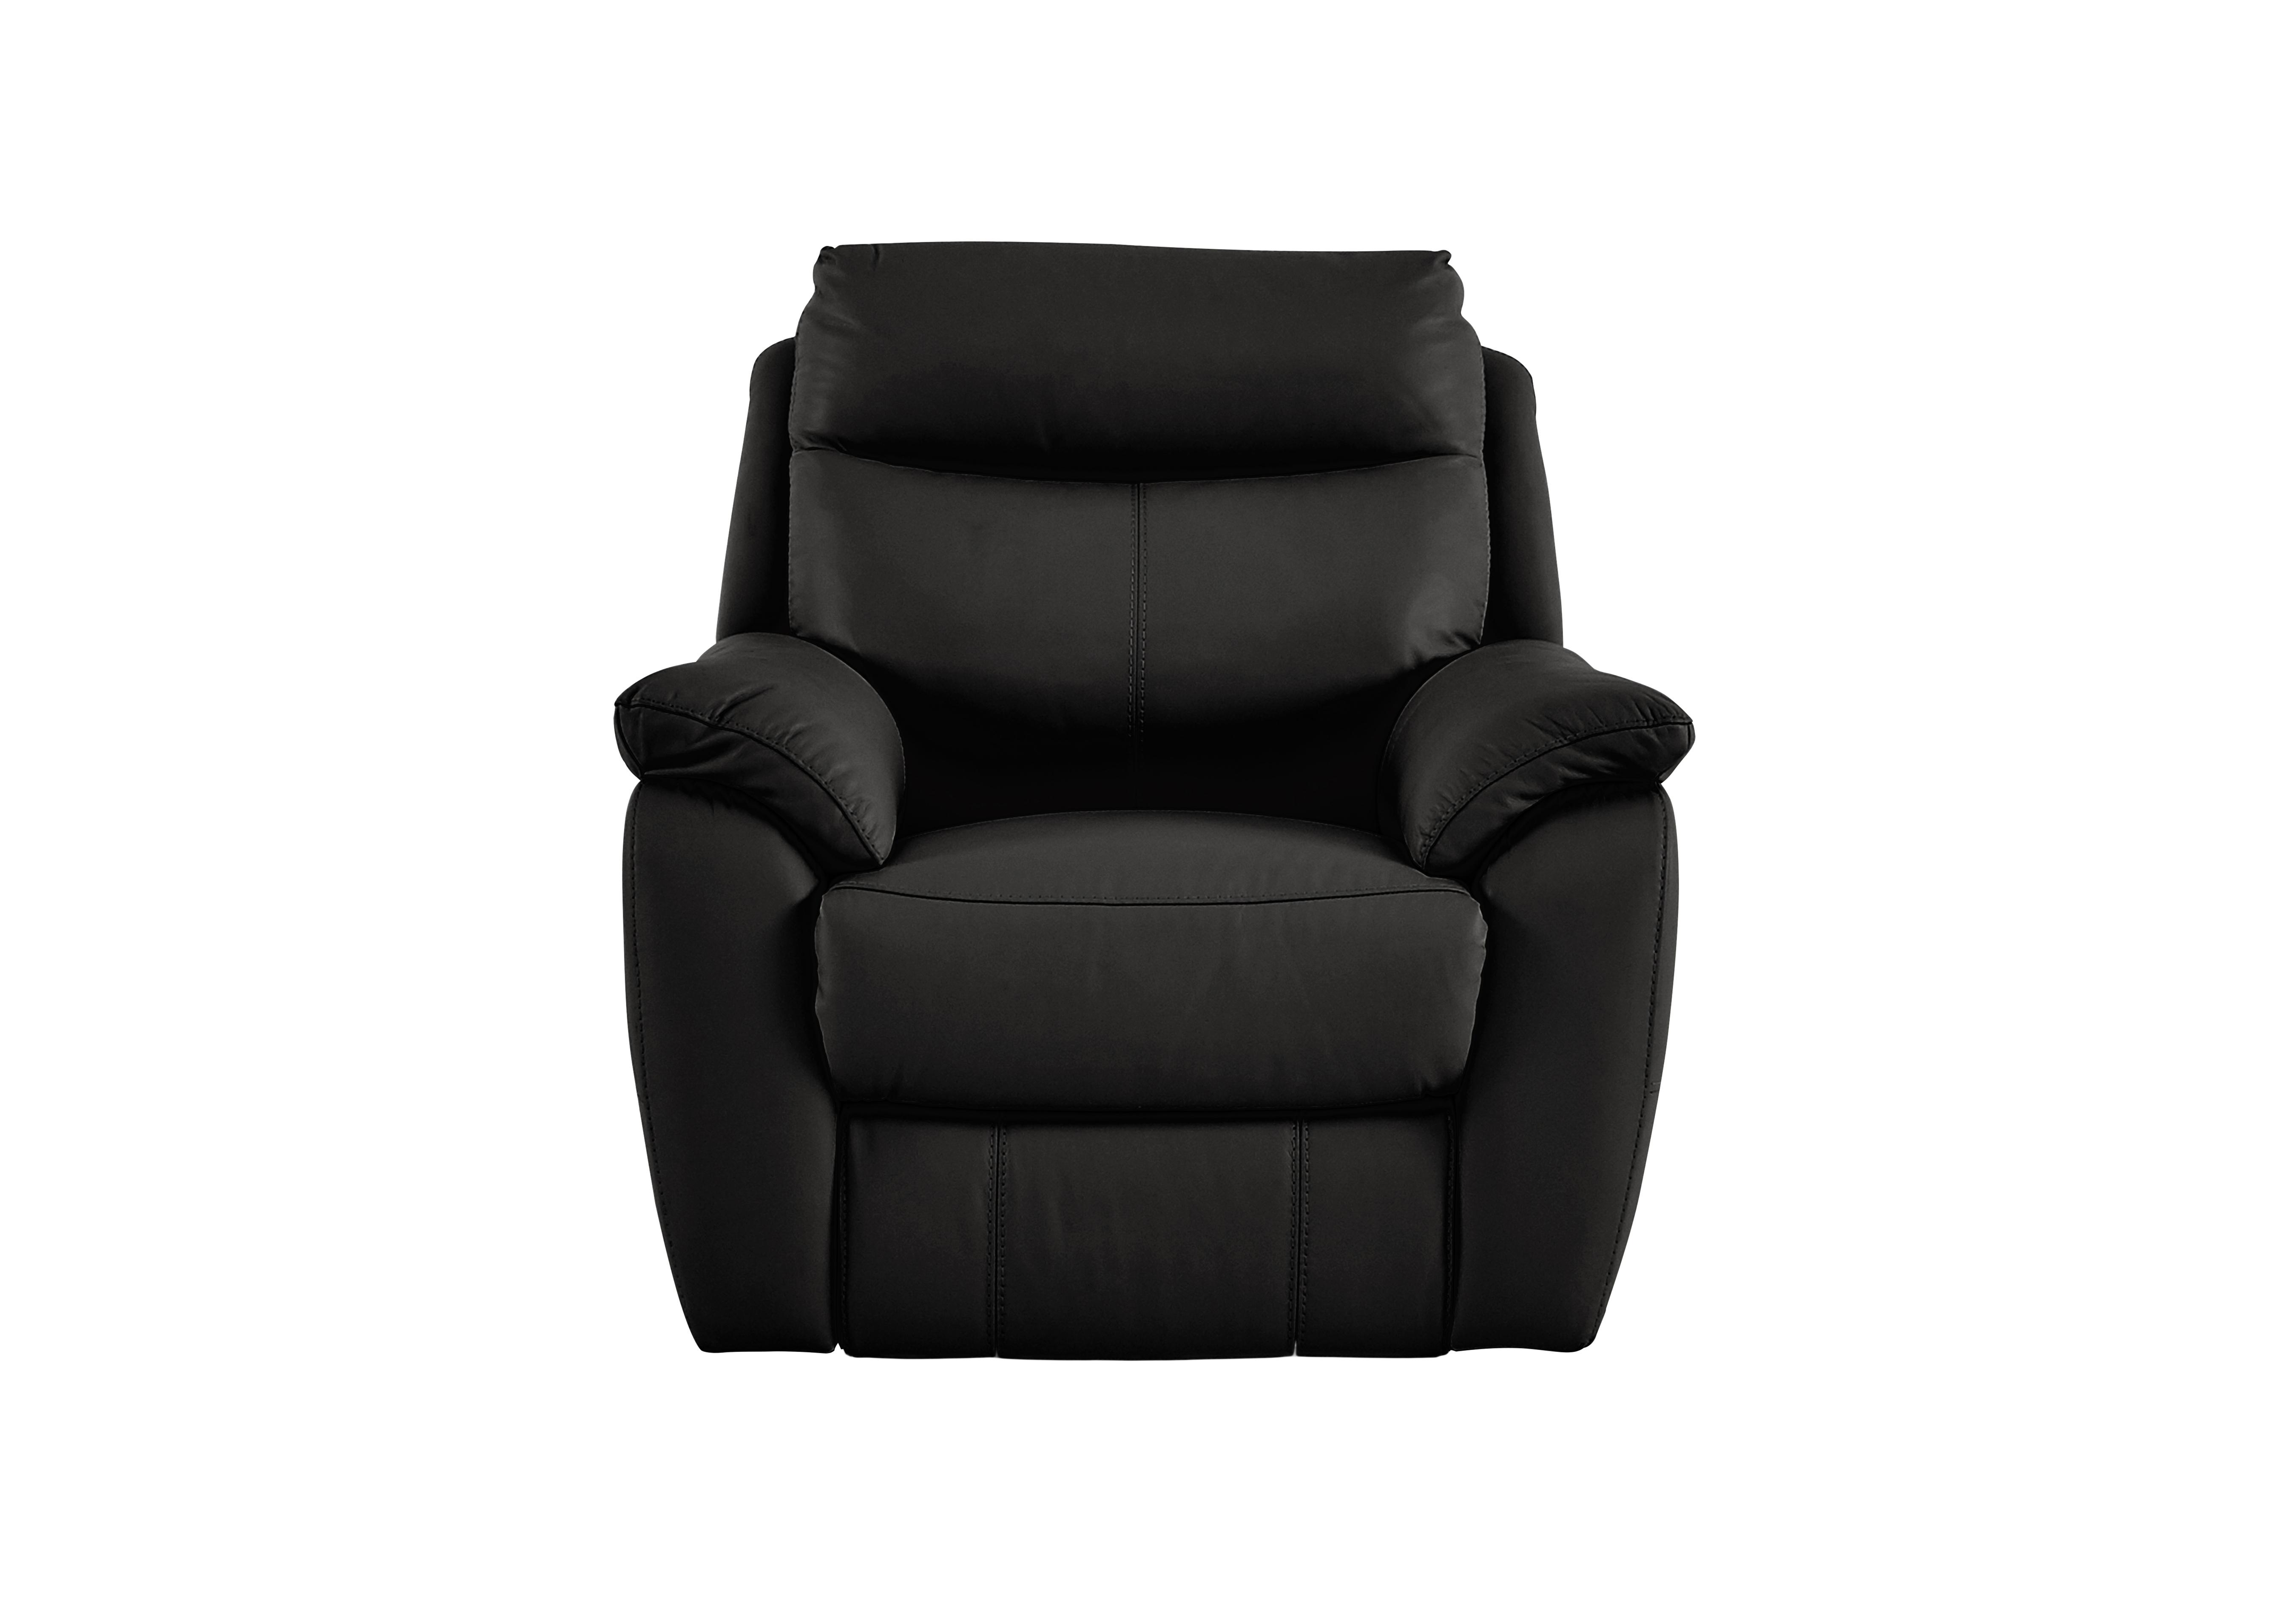 Snug Leather Armchair in Bv-3500 Classic Black on Furniture Village